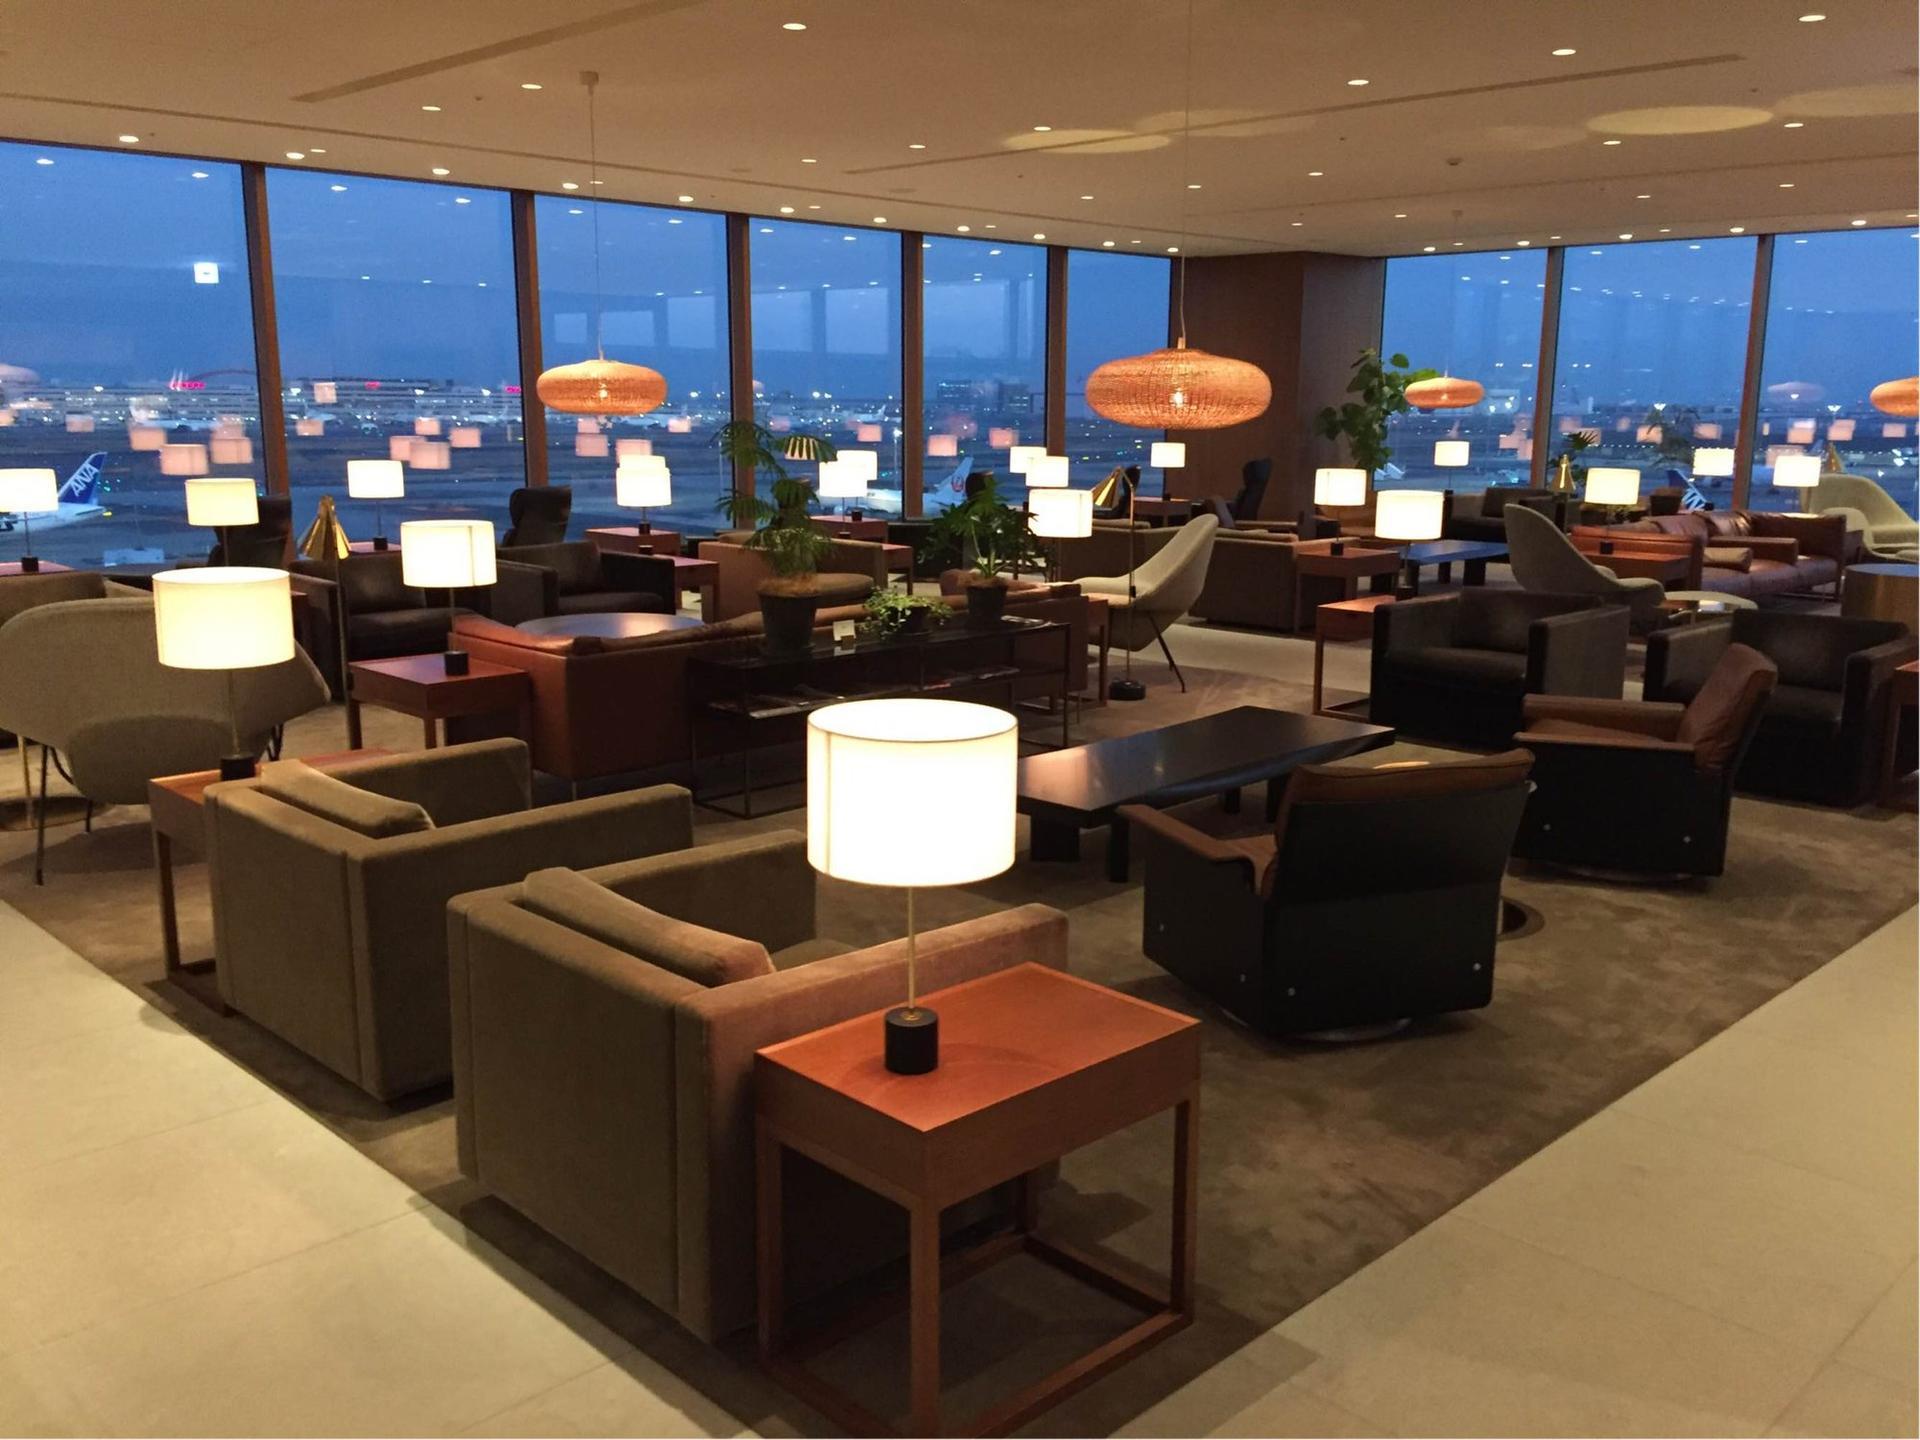 Cathay Pacific Lounge image 11 of 49